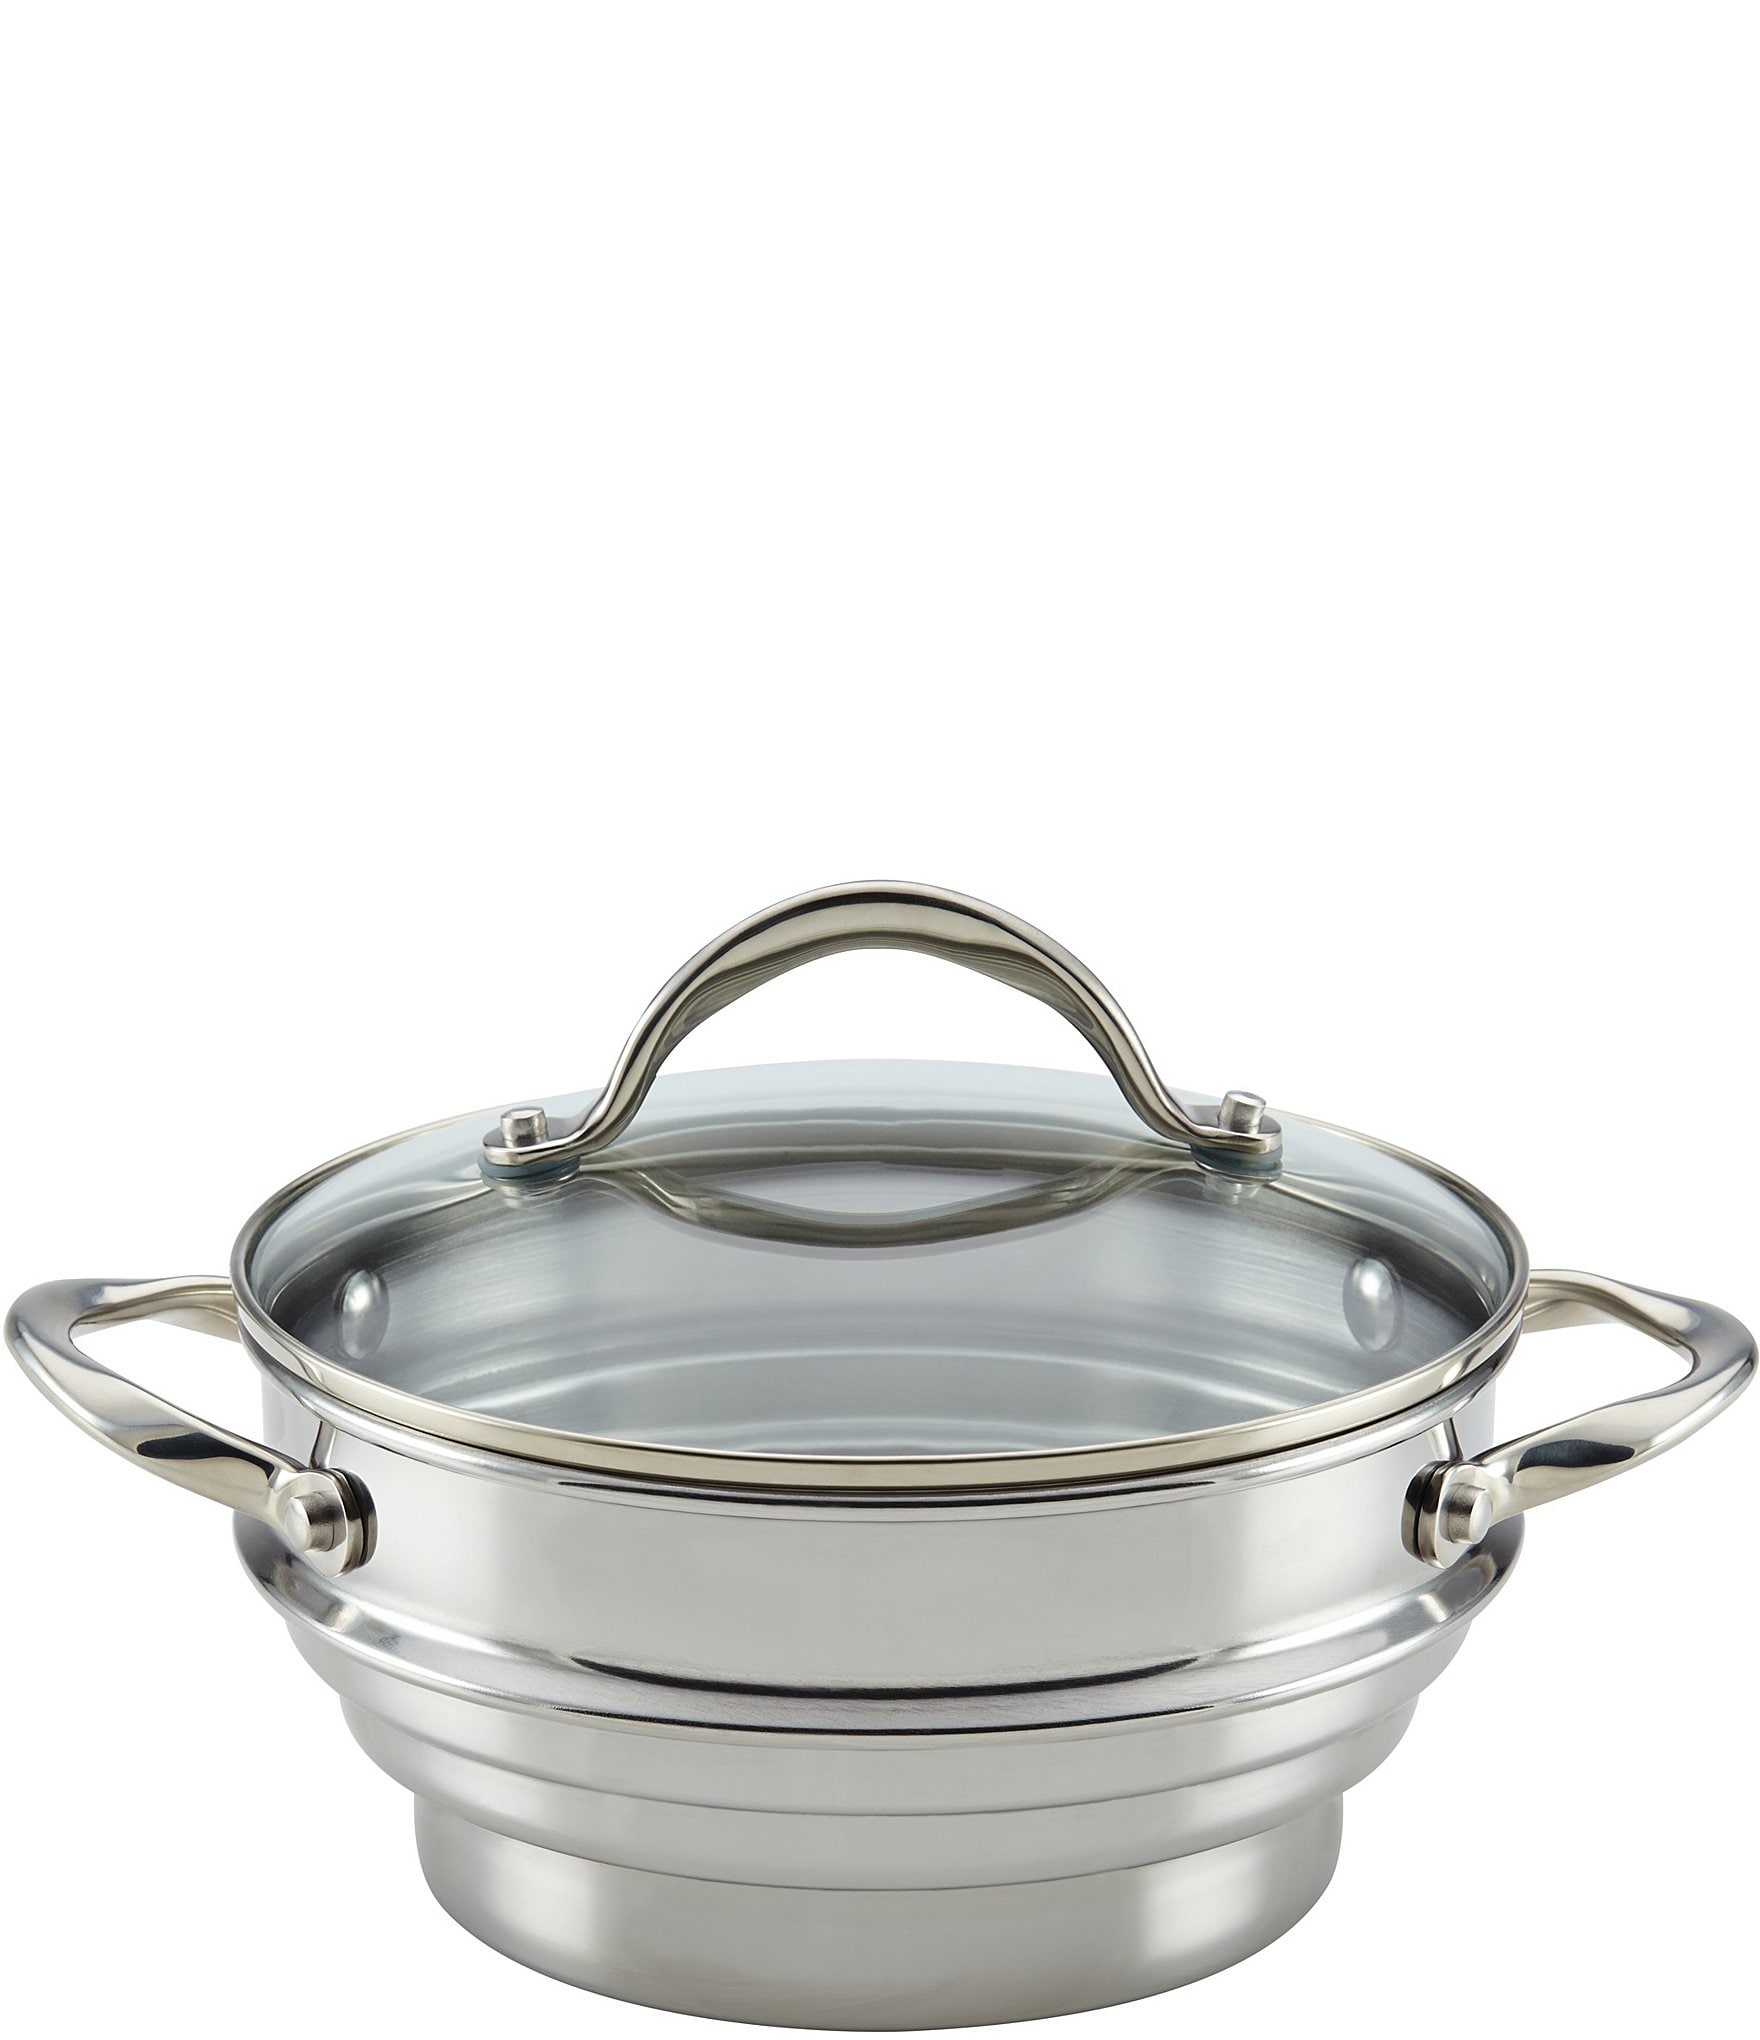 https://dimg.dillards.com/is/image/DillardsZoom/zoom/anolon-stainless-steel-universal-steamer-with-glass-lid/04278046_zi.jpg